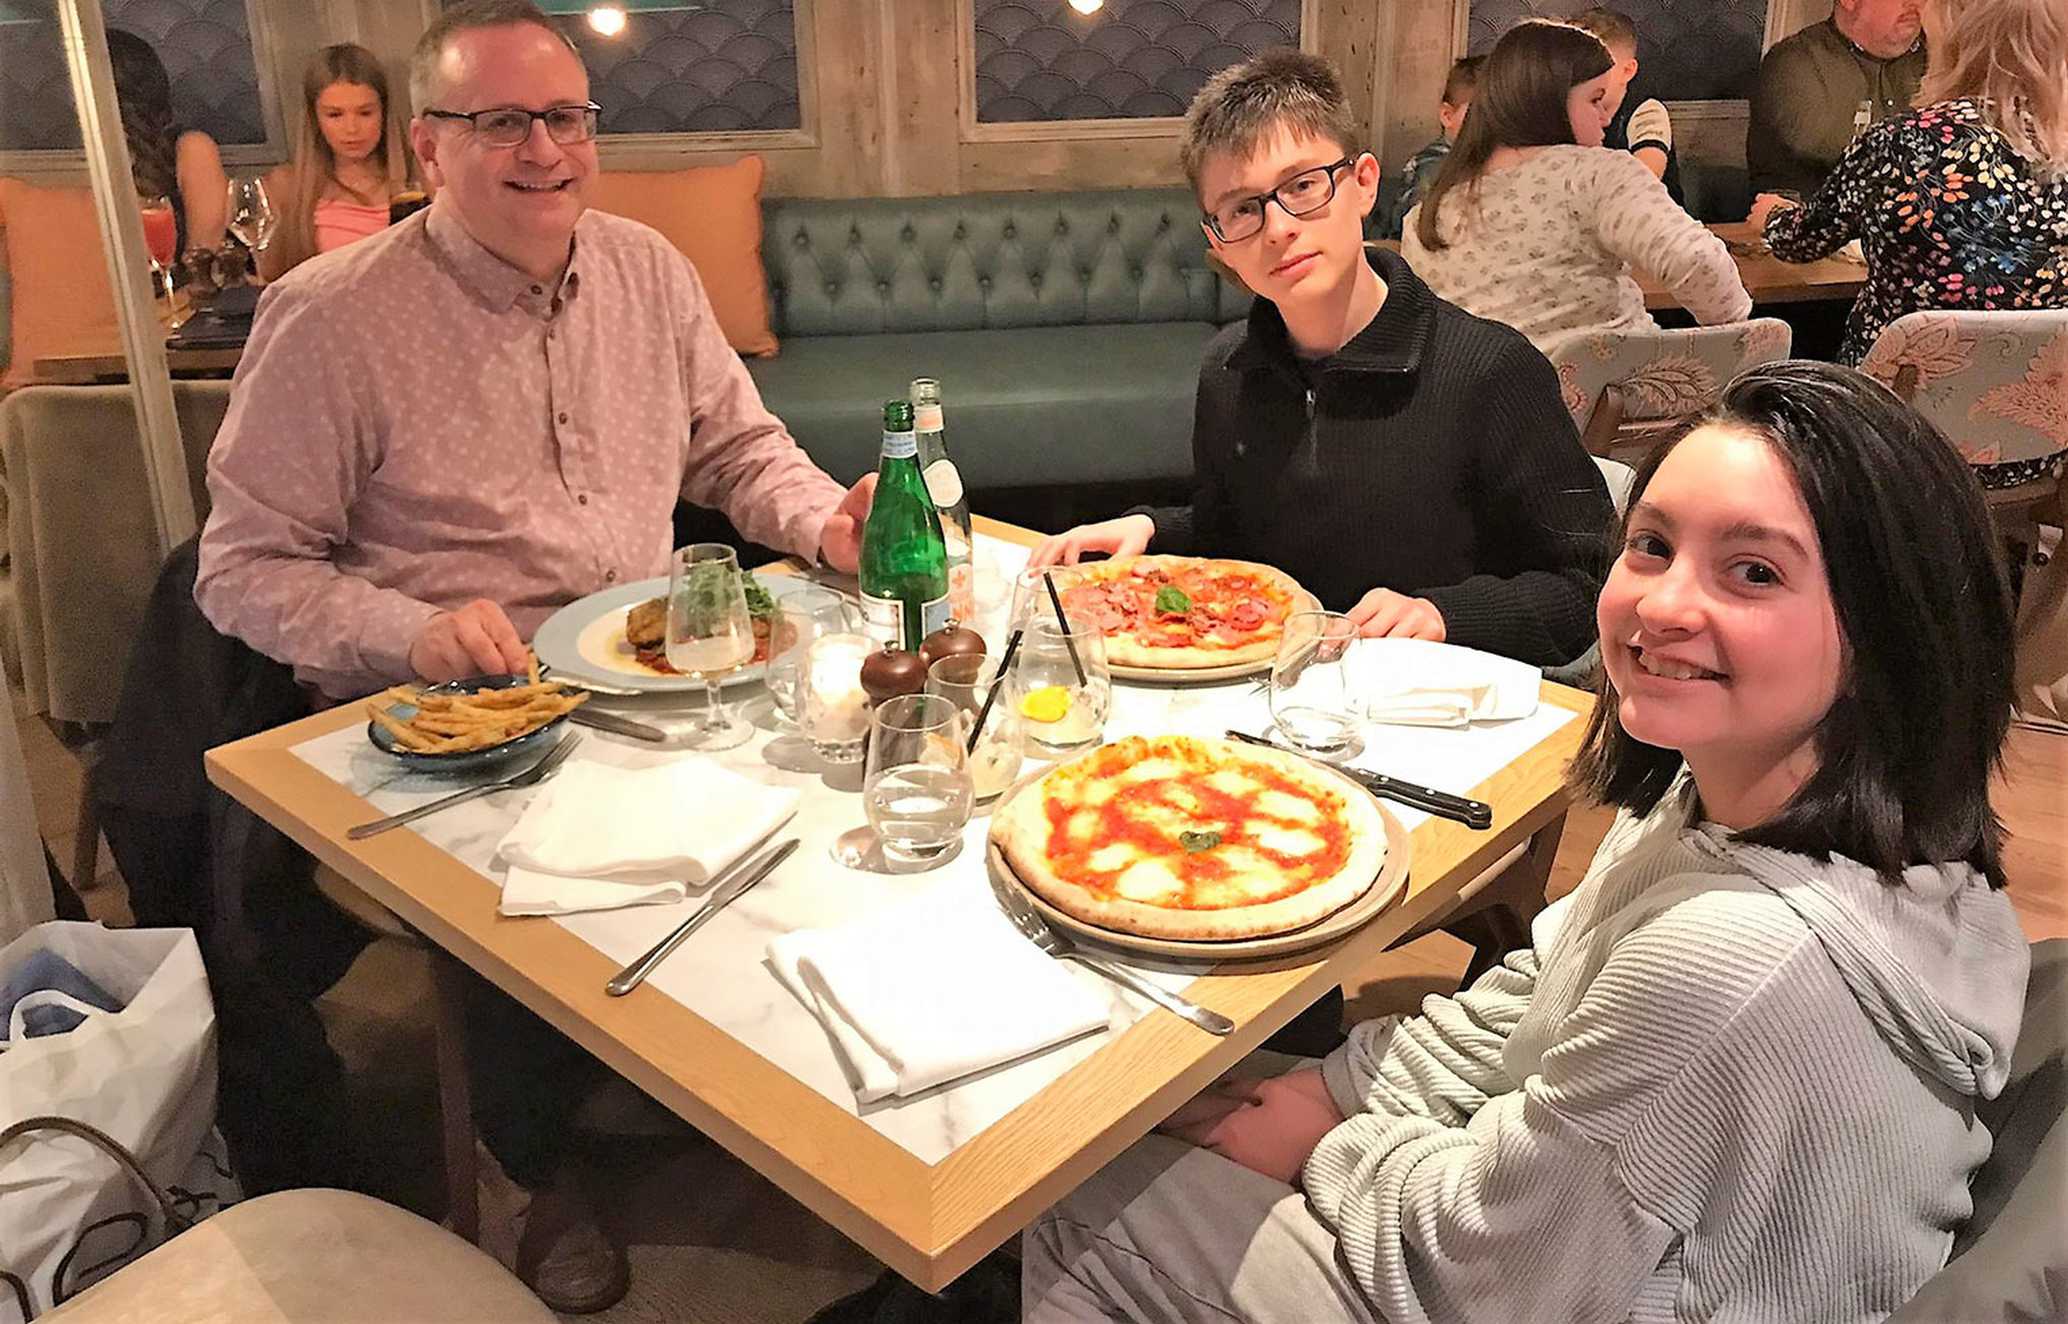 abi-eating-pizza-with-family-image-g.jpg